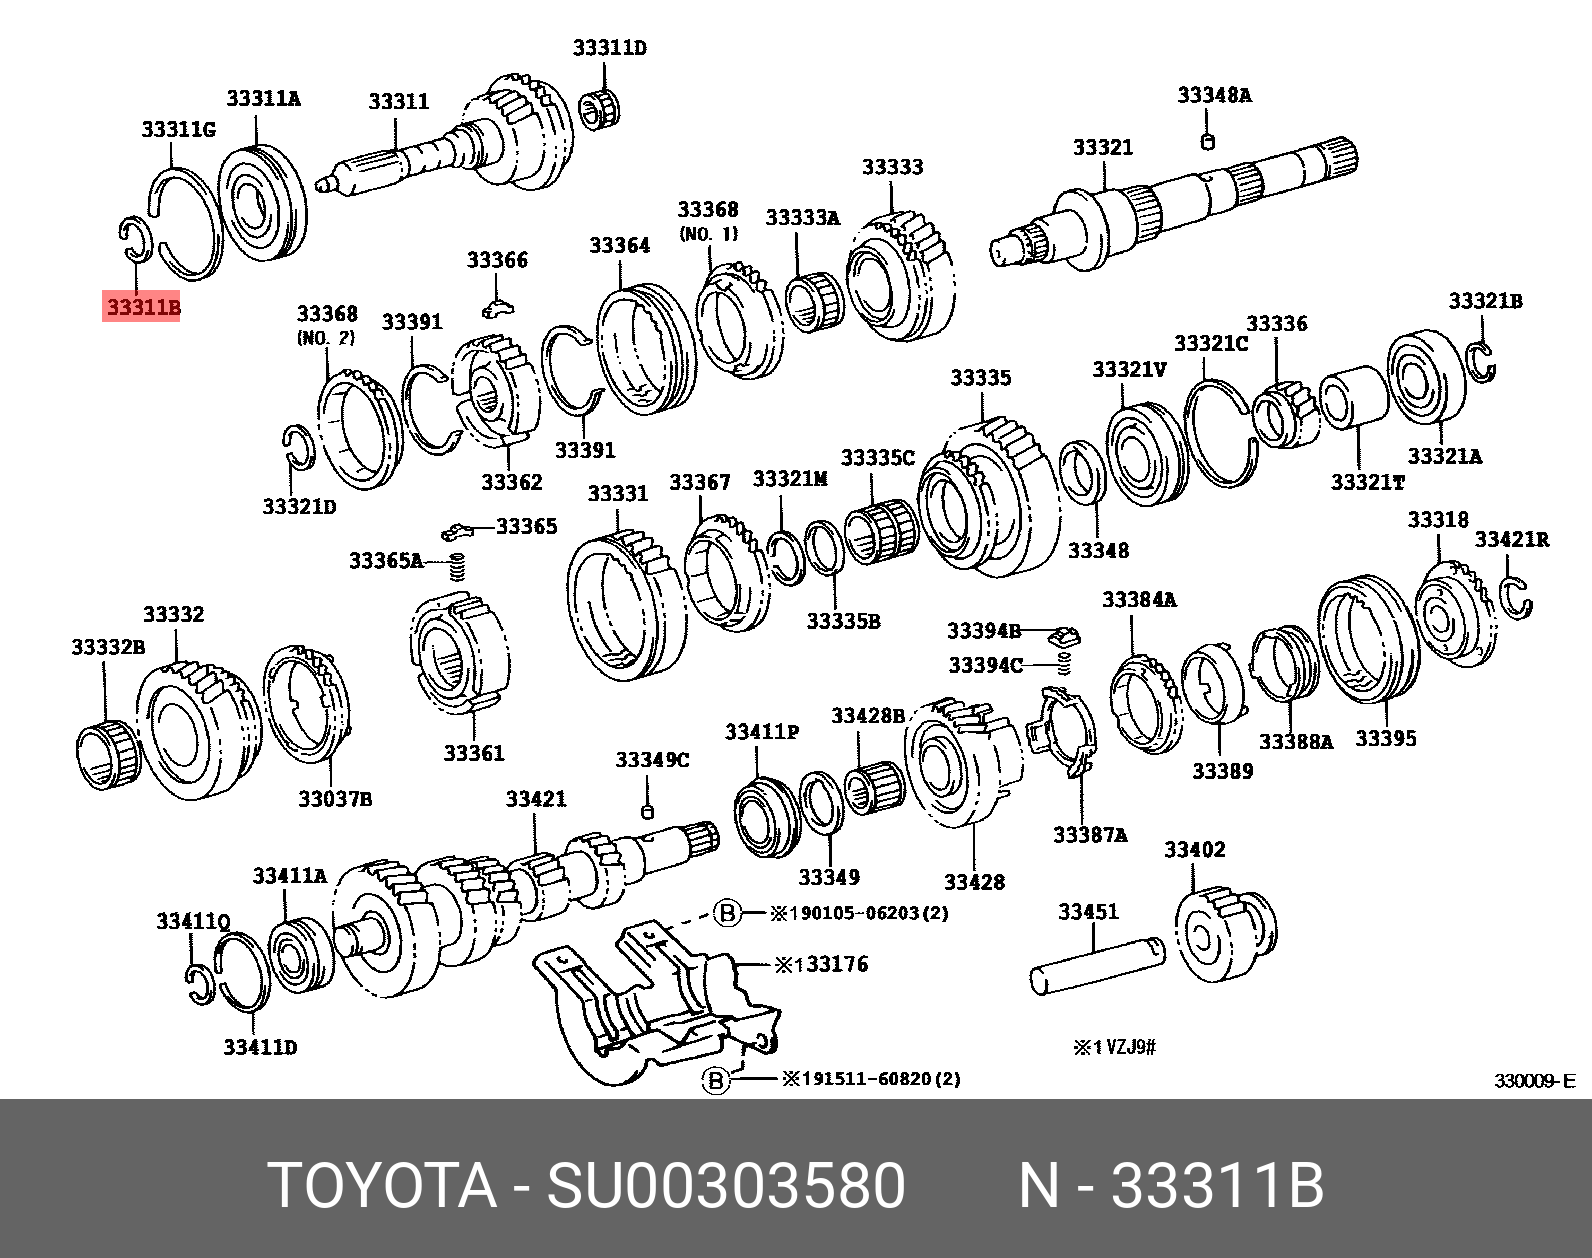 86 201608-, RING, SHAFT SNAP (FOR FRONT BEARING)